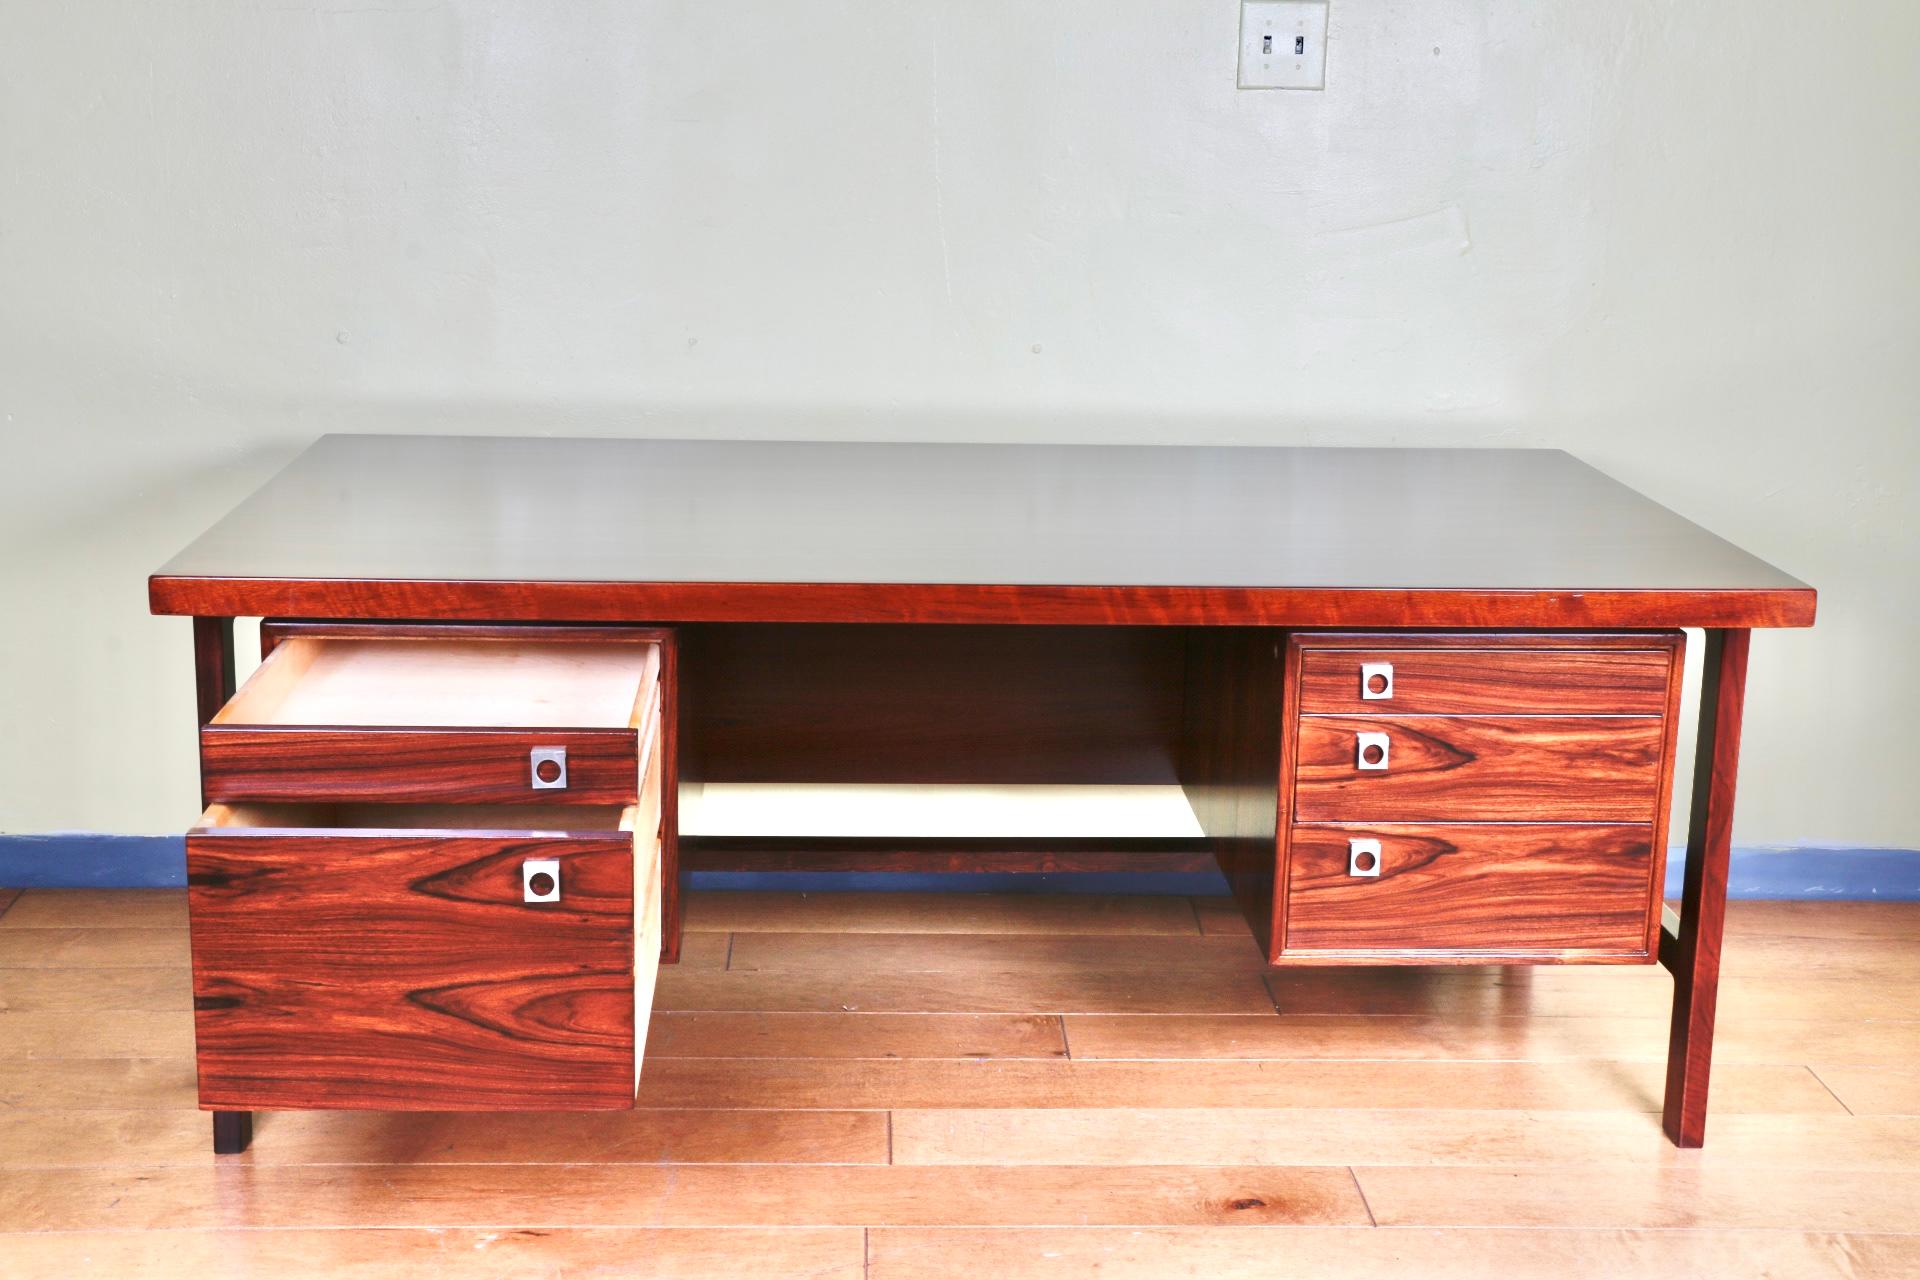 Gorgeous Rosewood executive desk in good refinished condition. Very strong and sturdy. Beautiful detailed grain. All drawers slide perfectly and work well. Great for any home or office. Great design and brand.